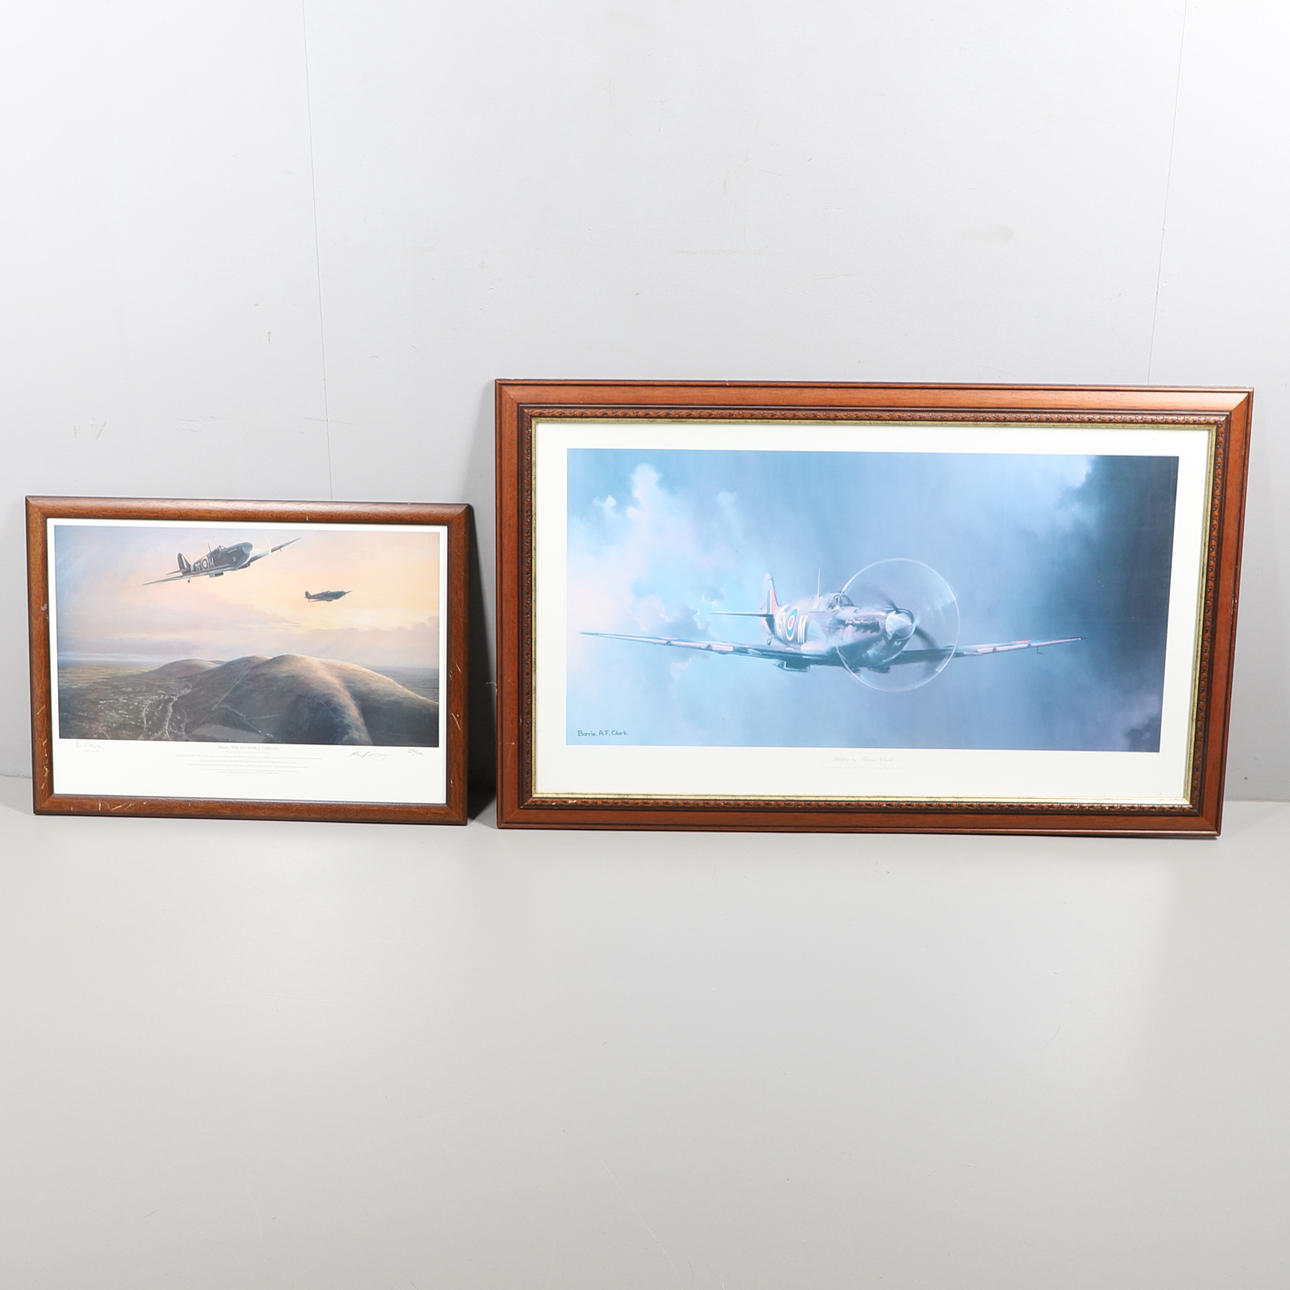 A LARGE COLOUR PRINT OF A SPITFIRE BY BARRIE CLARK, AND A SIMILAR LIMITED EDITION PRINT.